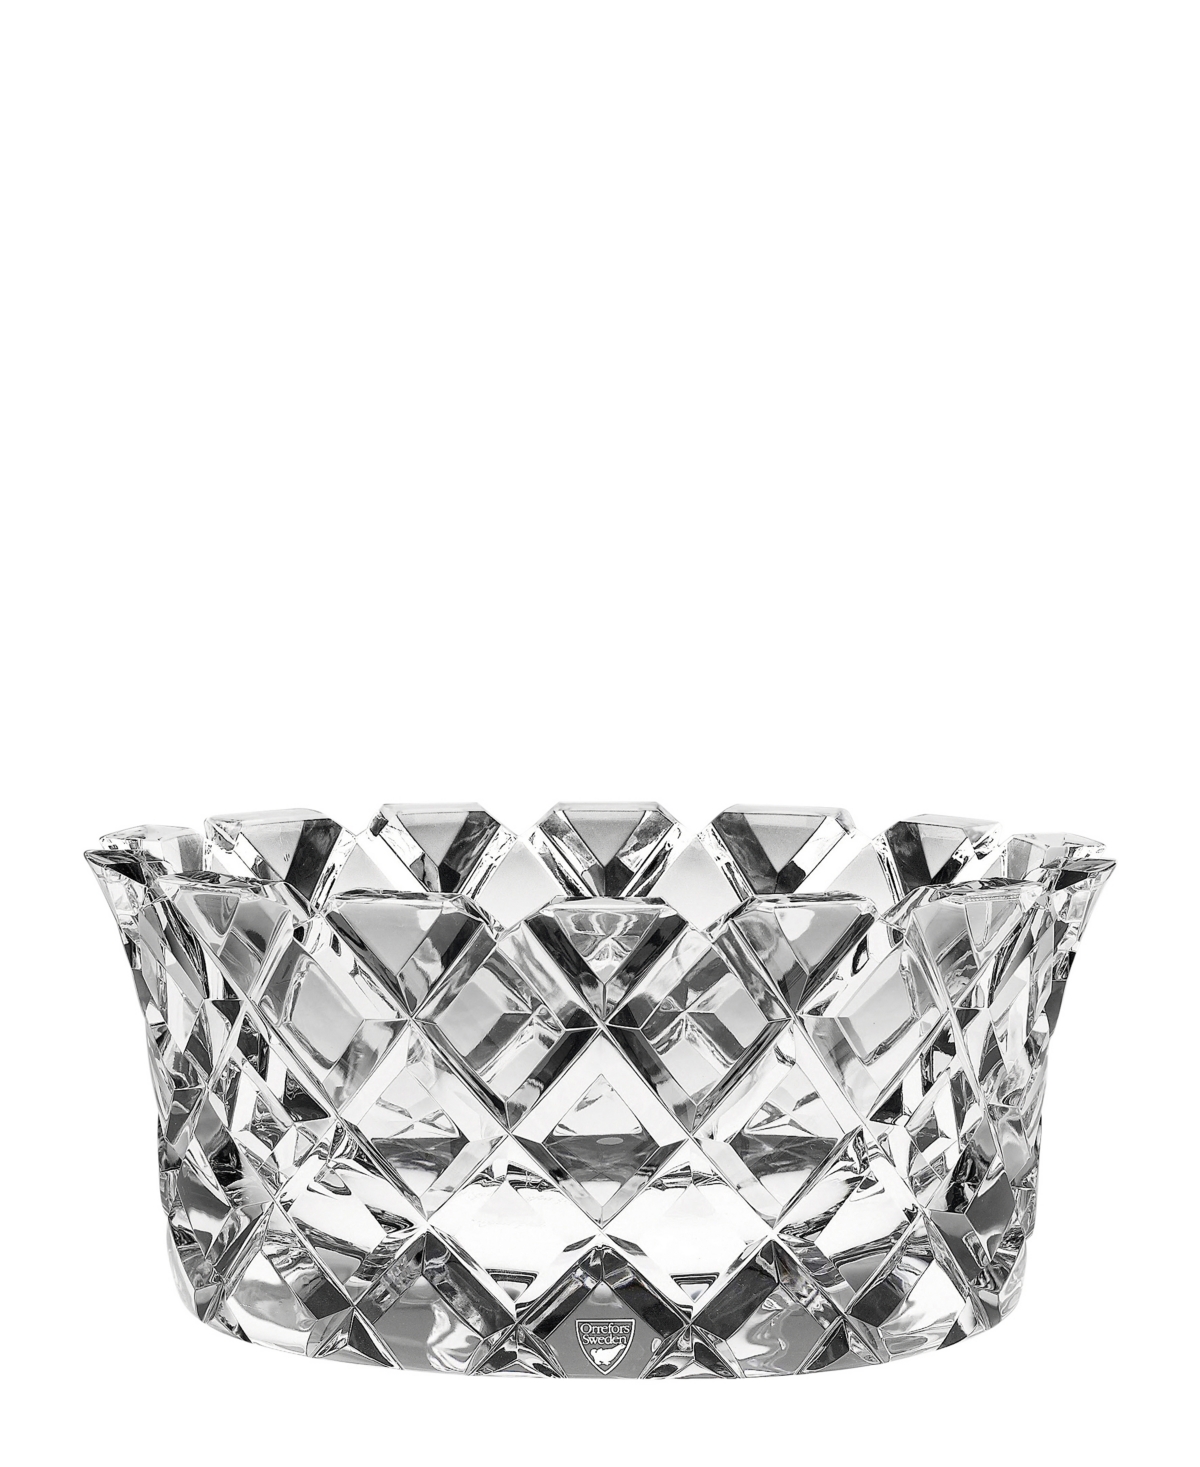 Orrefors Sofiero Bowl In Clear